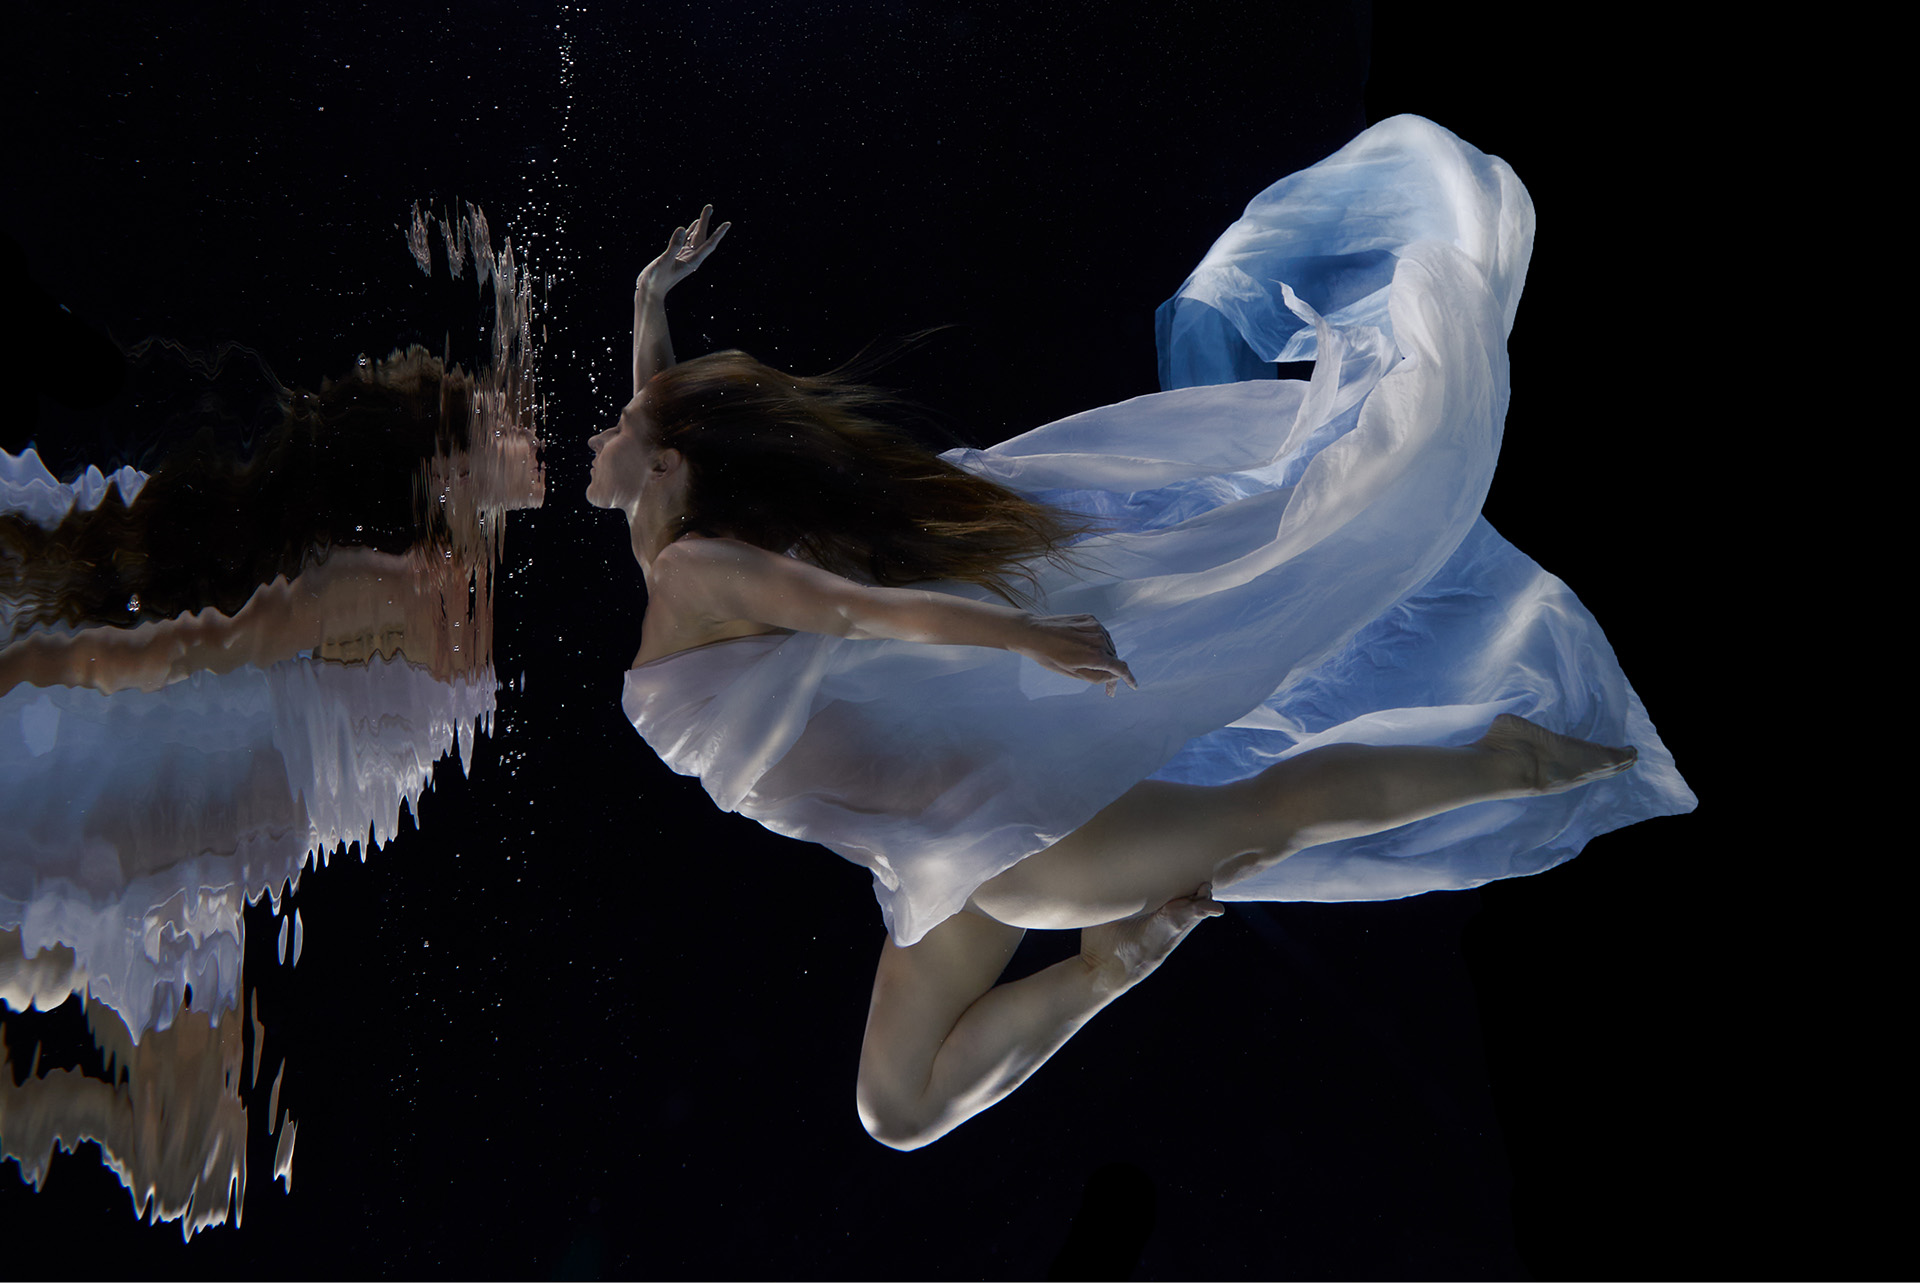 LITHIUM V 
FINEART NUDE UNDERWATER